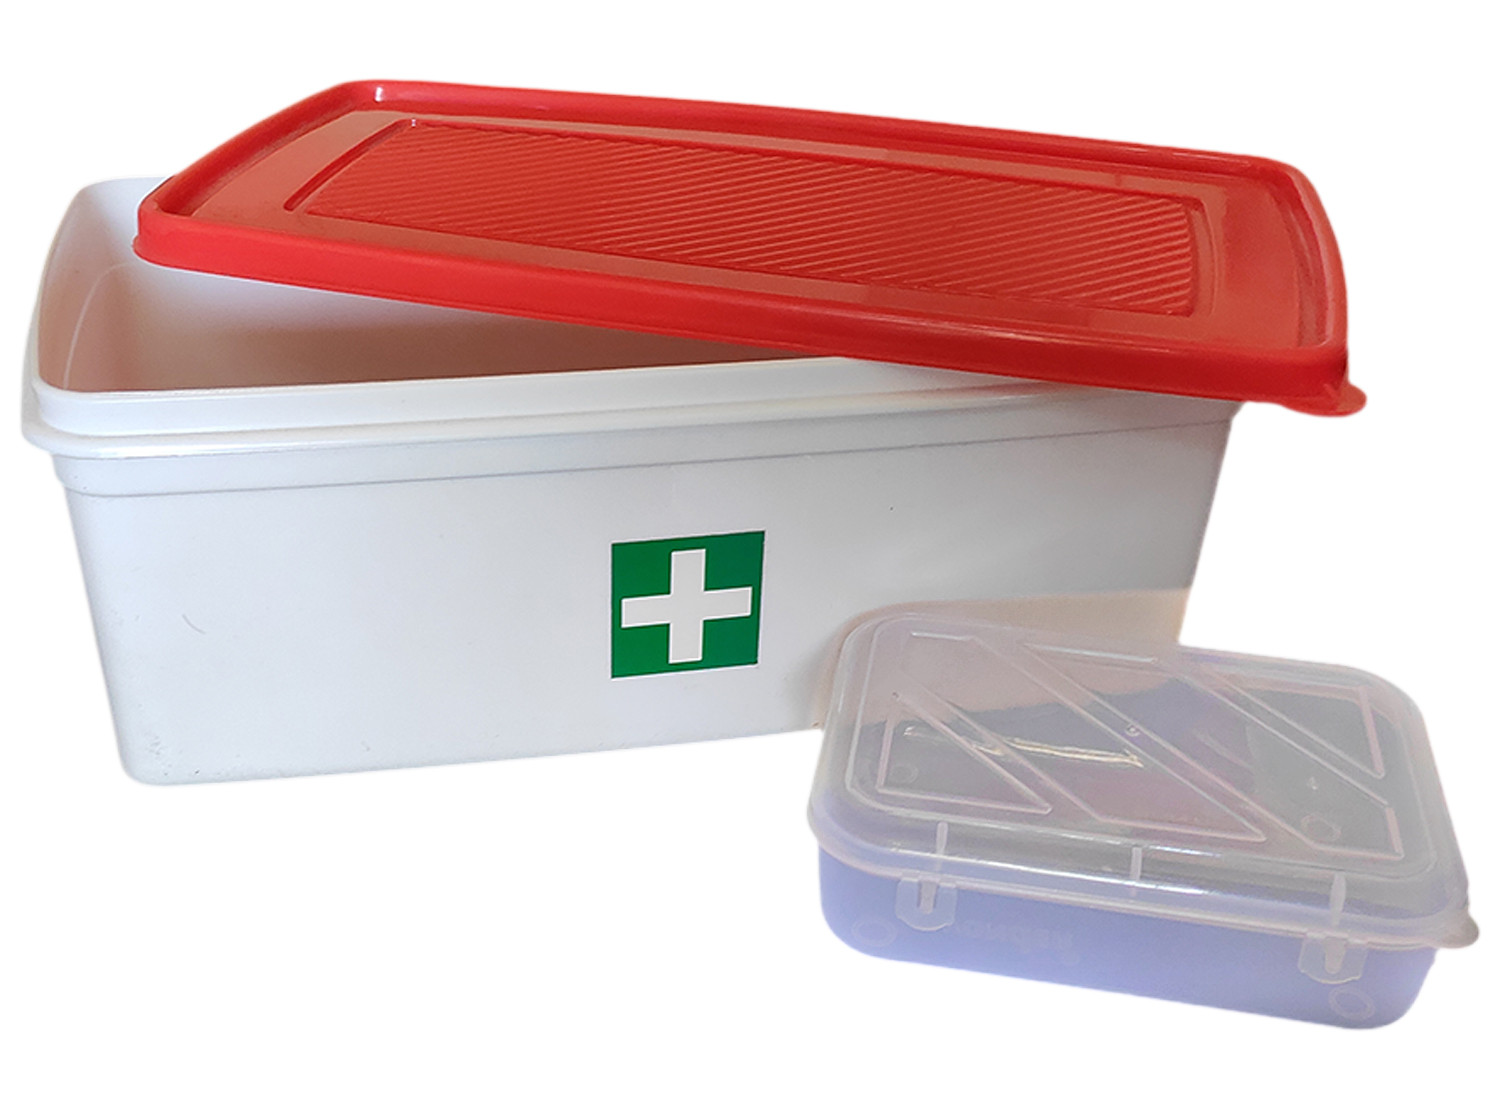 Kuber Industries Multiuses Plastic Medicine/First Aid Box (Red & White)